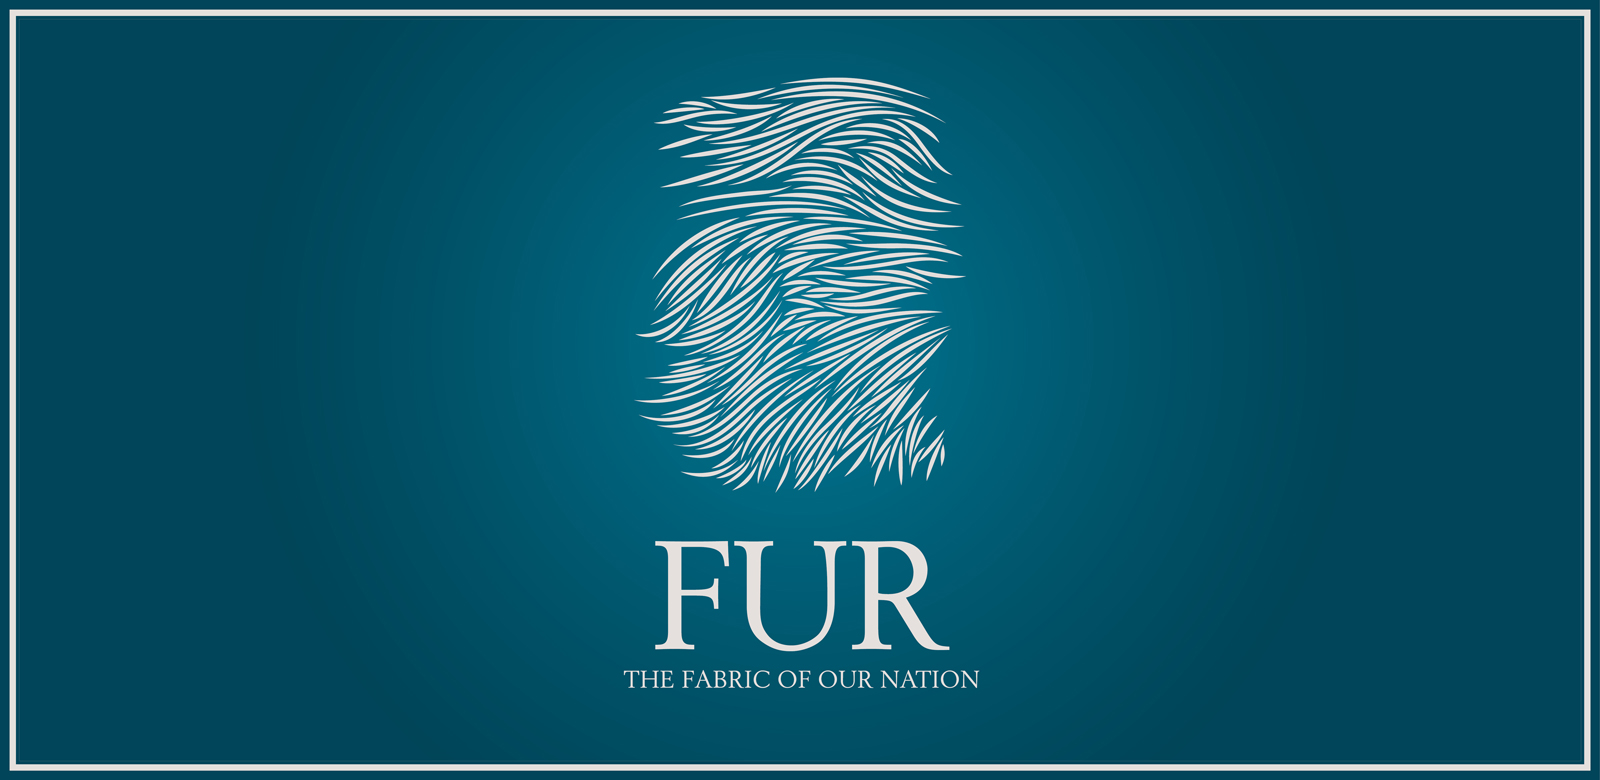 April 25 to July 3, 2018 - FUR: The Fabric of our Nation